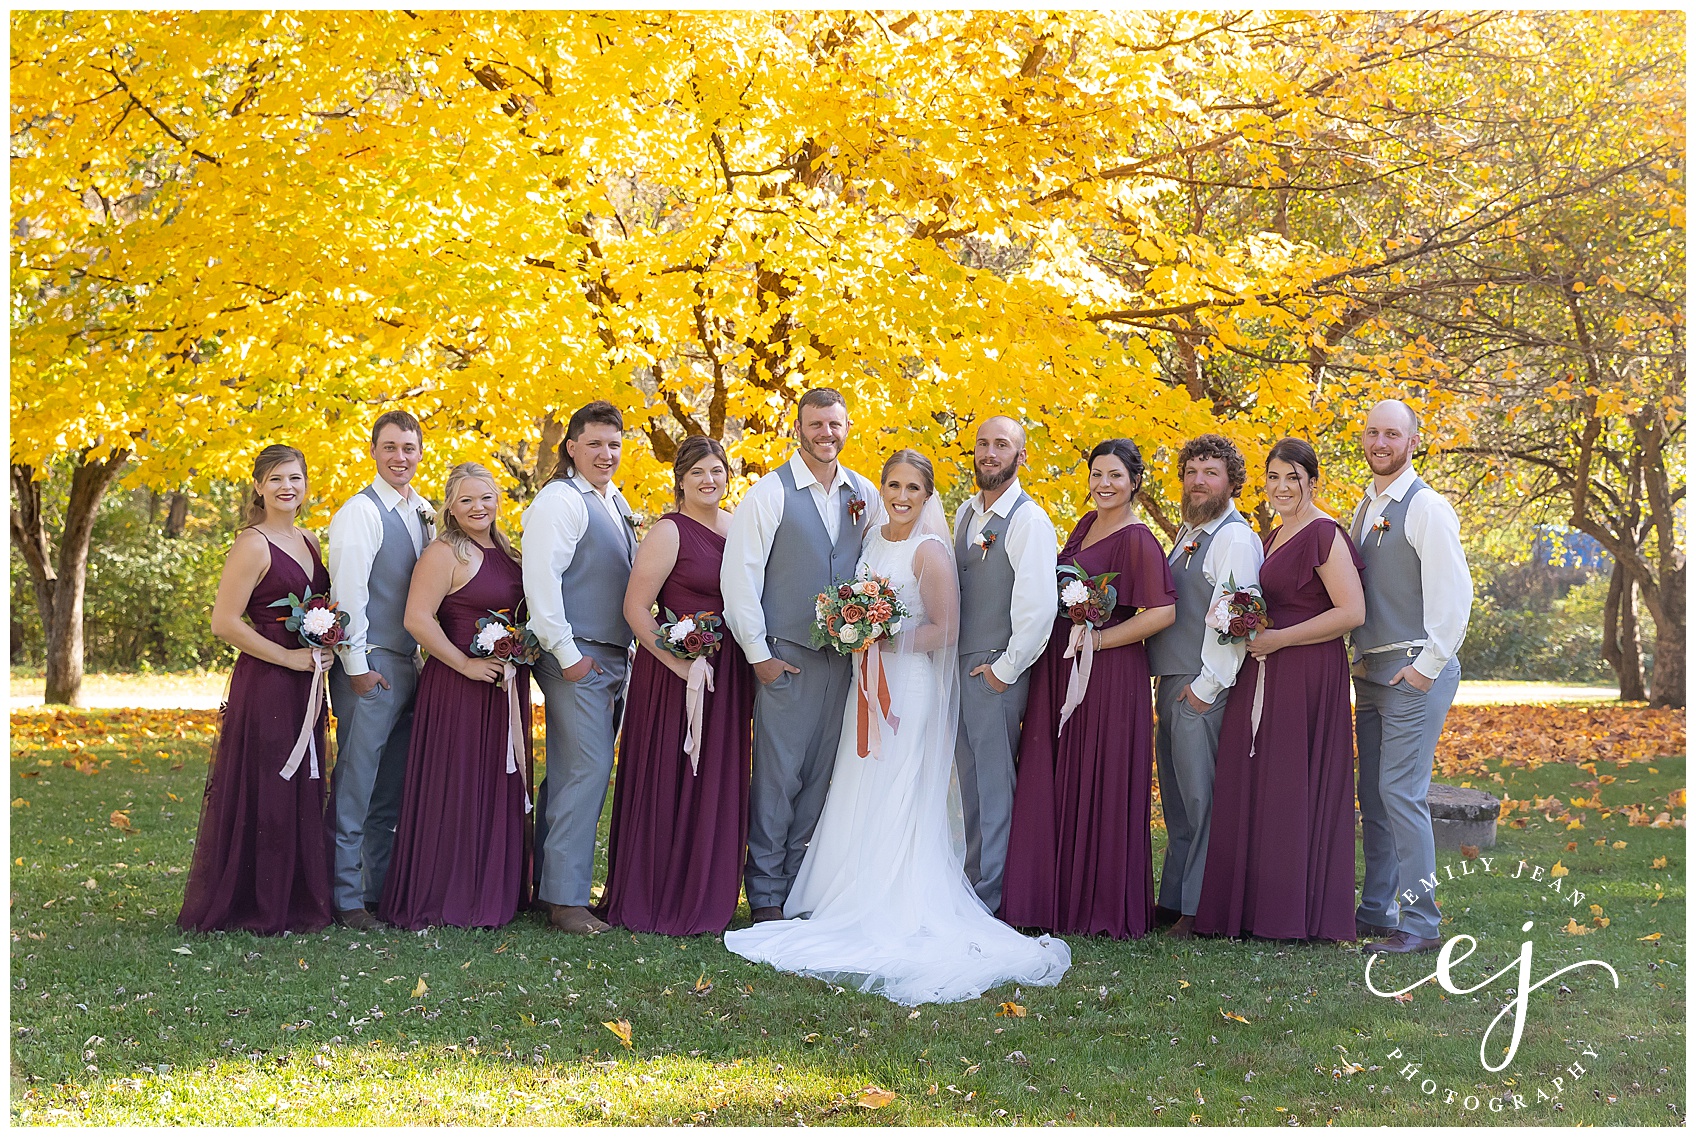 bridal wedding party with mean and women in grey and burgundy